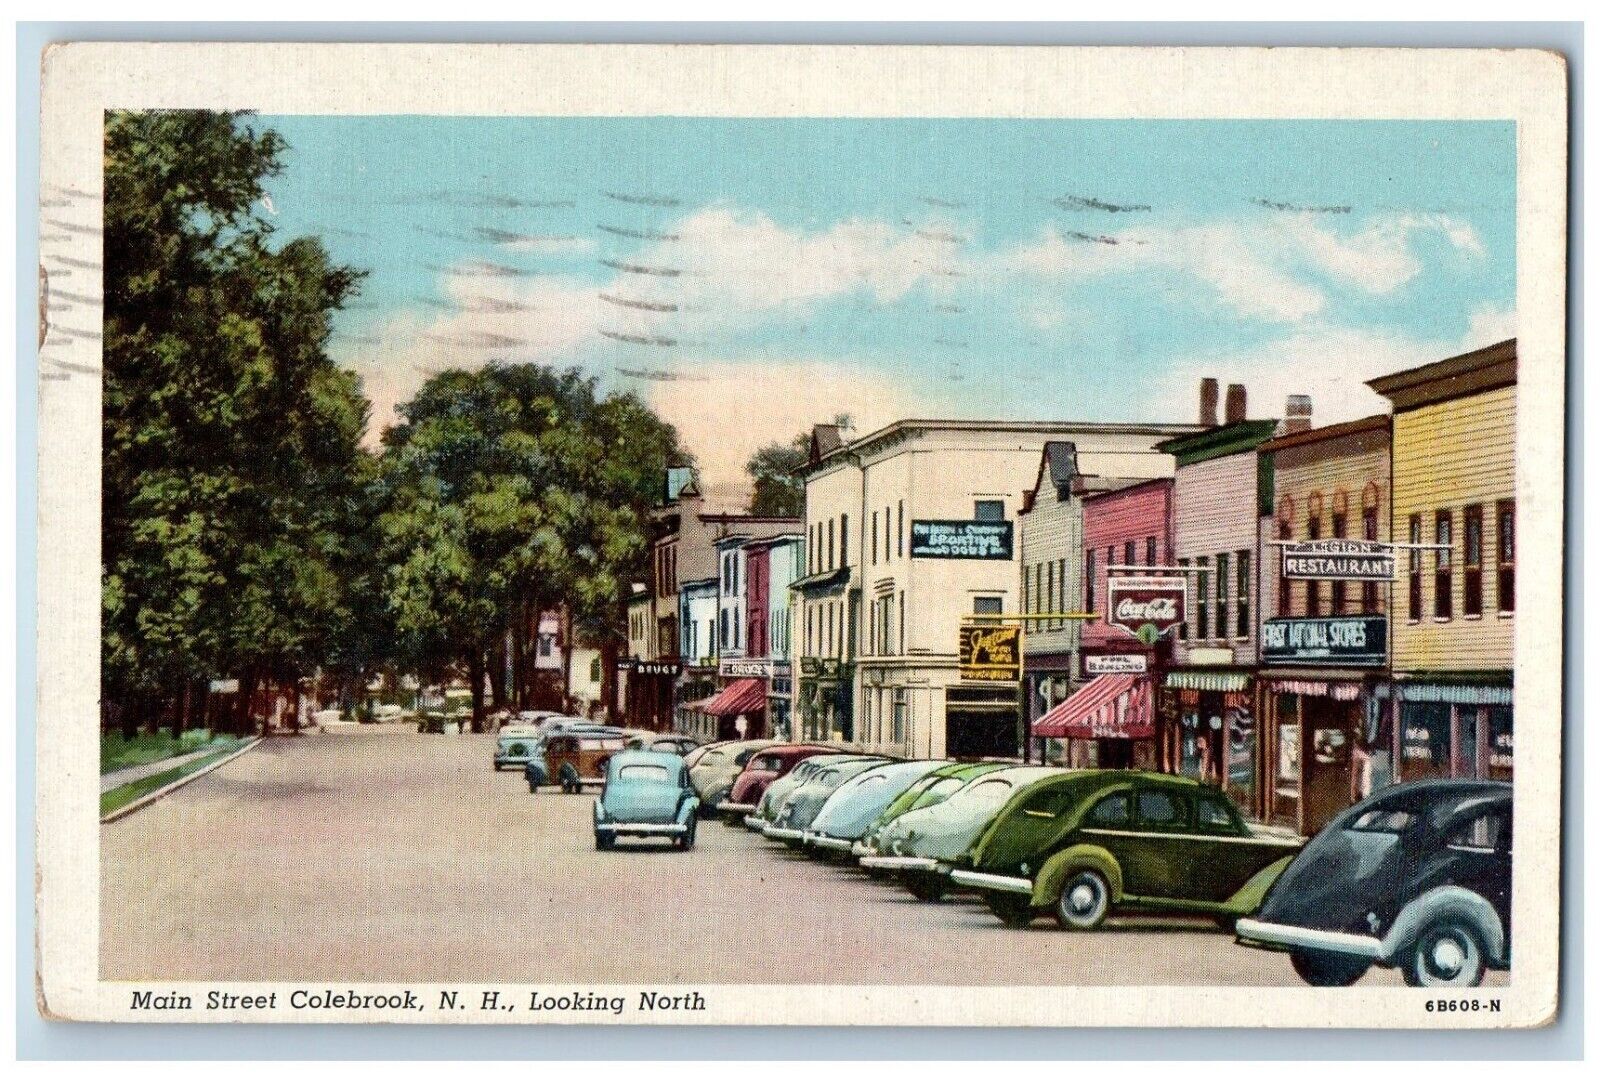 Colebrook New Hampshire Postcard Main Street Looking North 1950 Vintage Antique